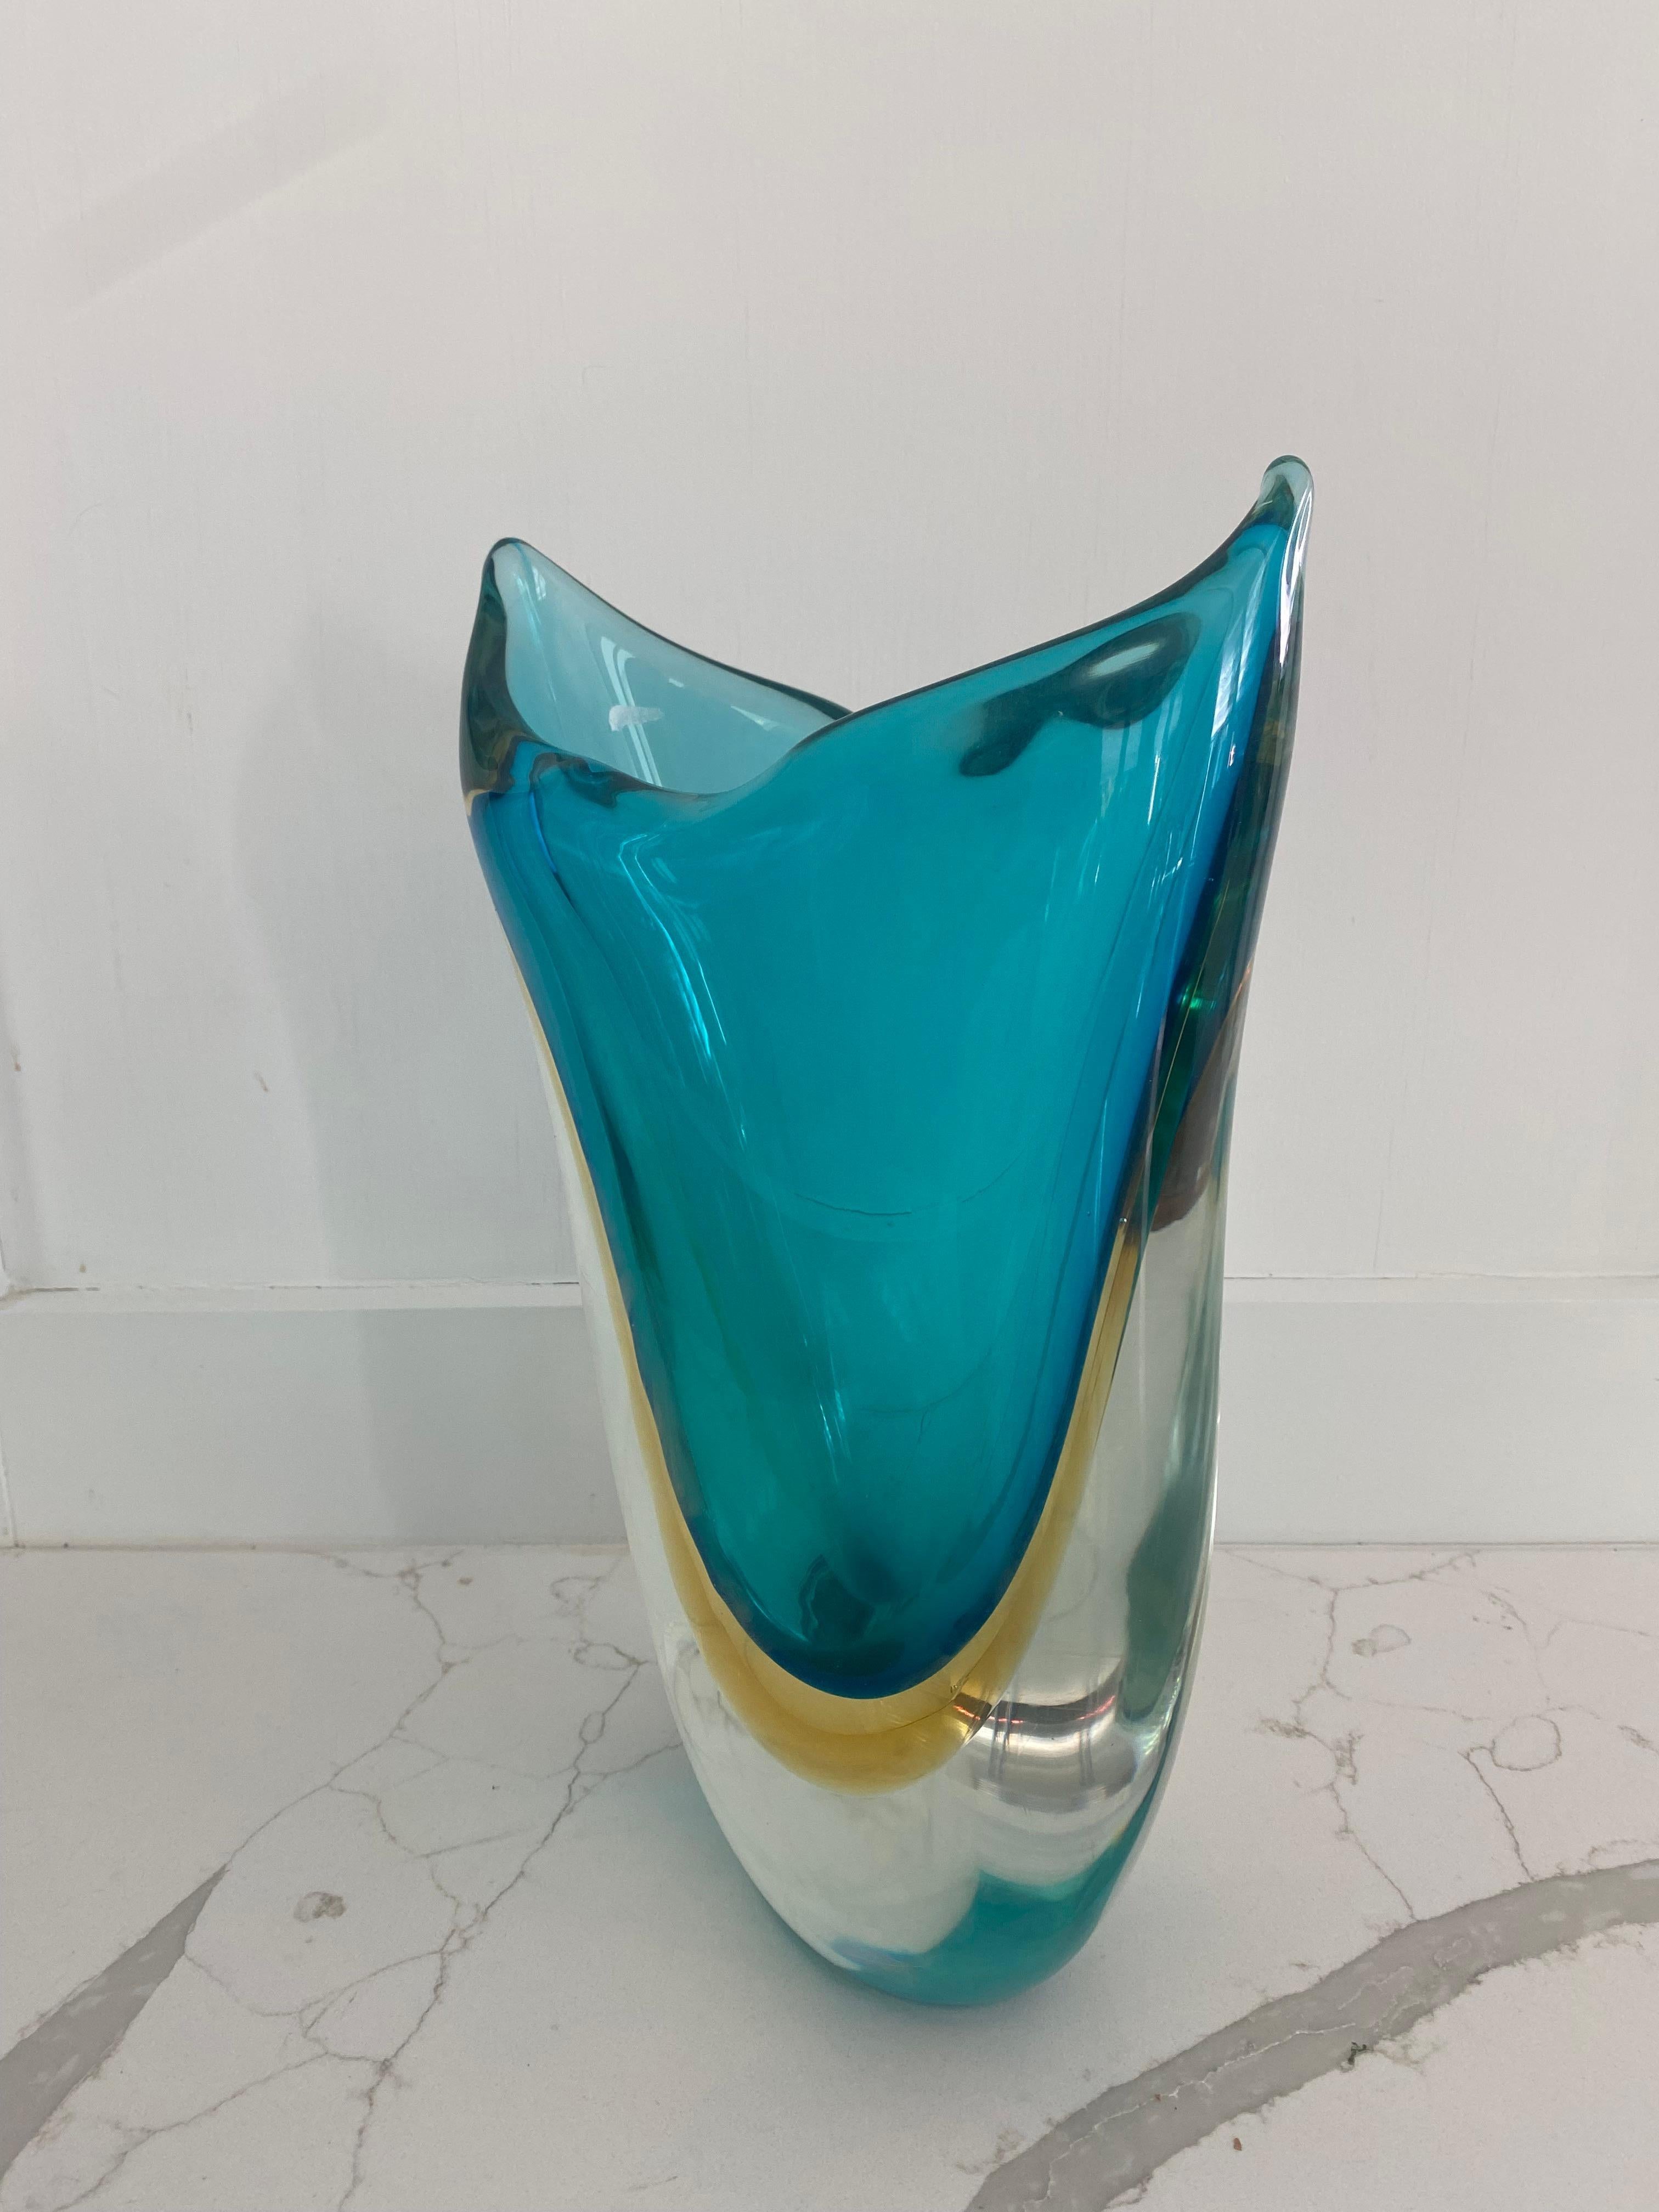 Heavy stylized sommerso vase in a twisted form in encased clear glass with turquoise and yellow glass.

4 x 7 x 12 inches high